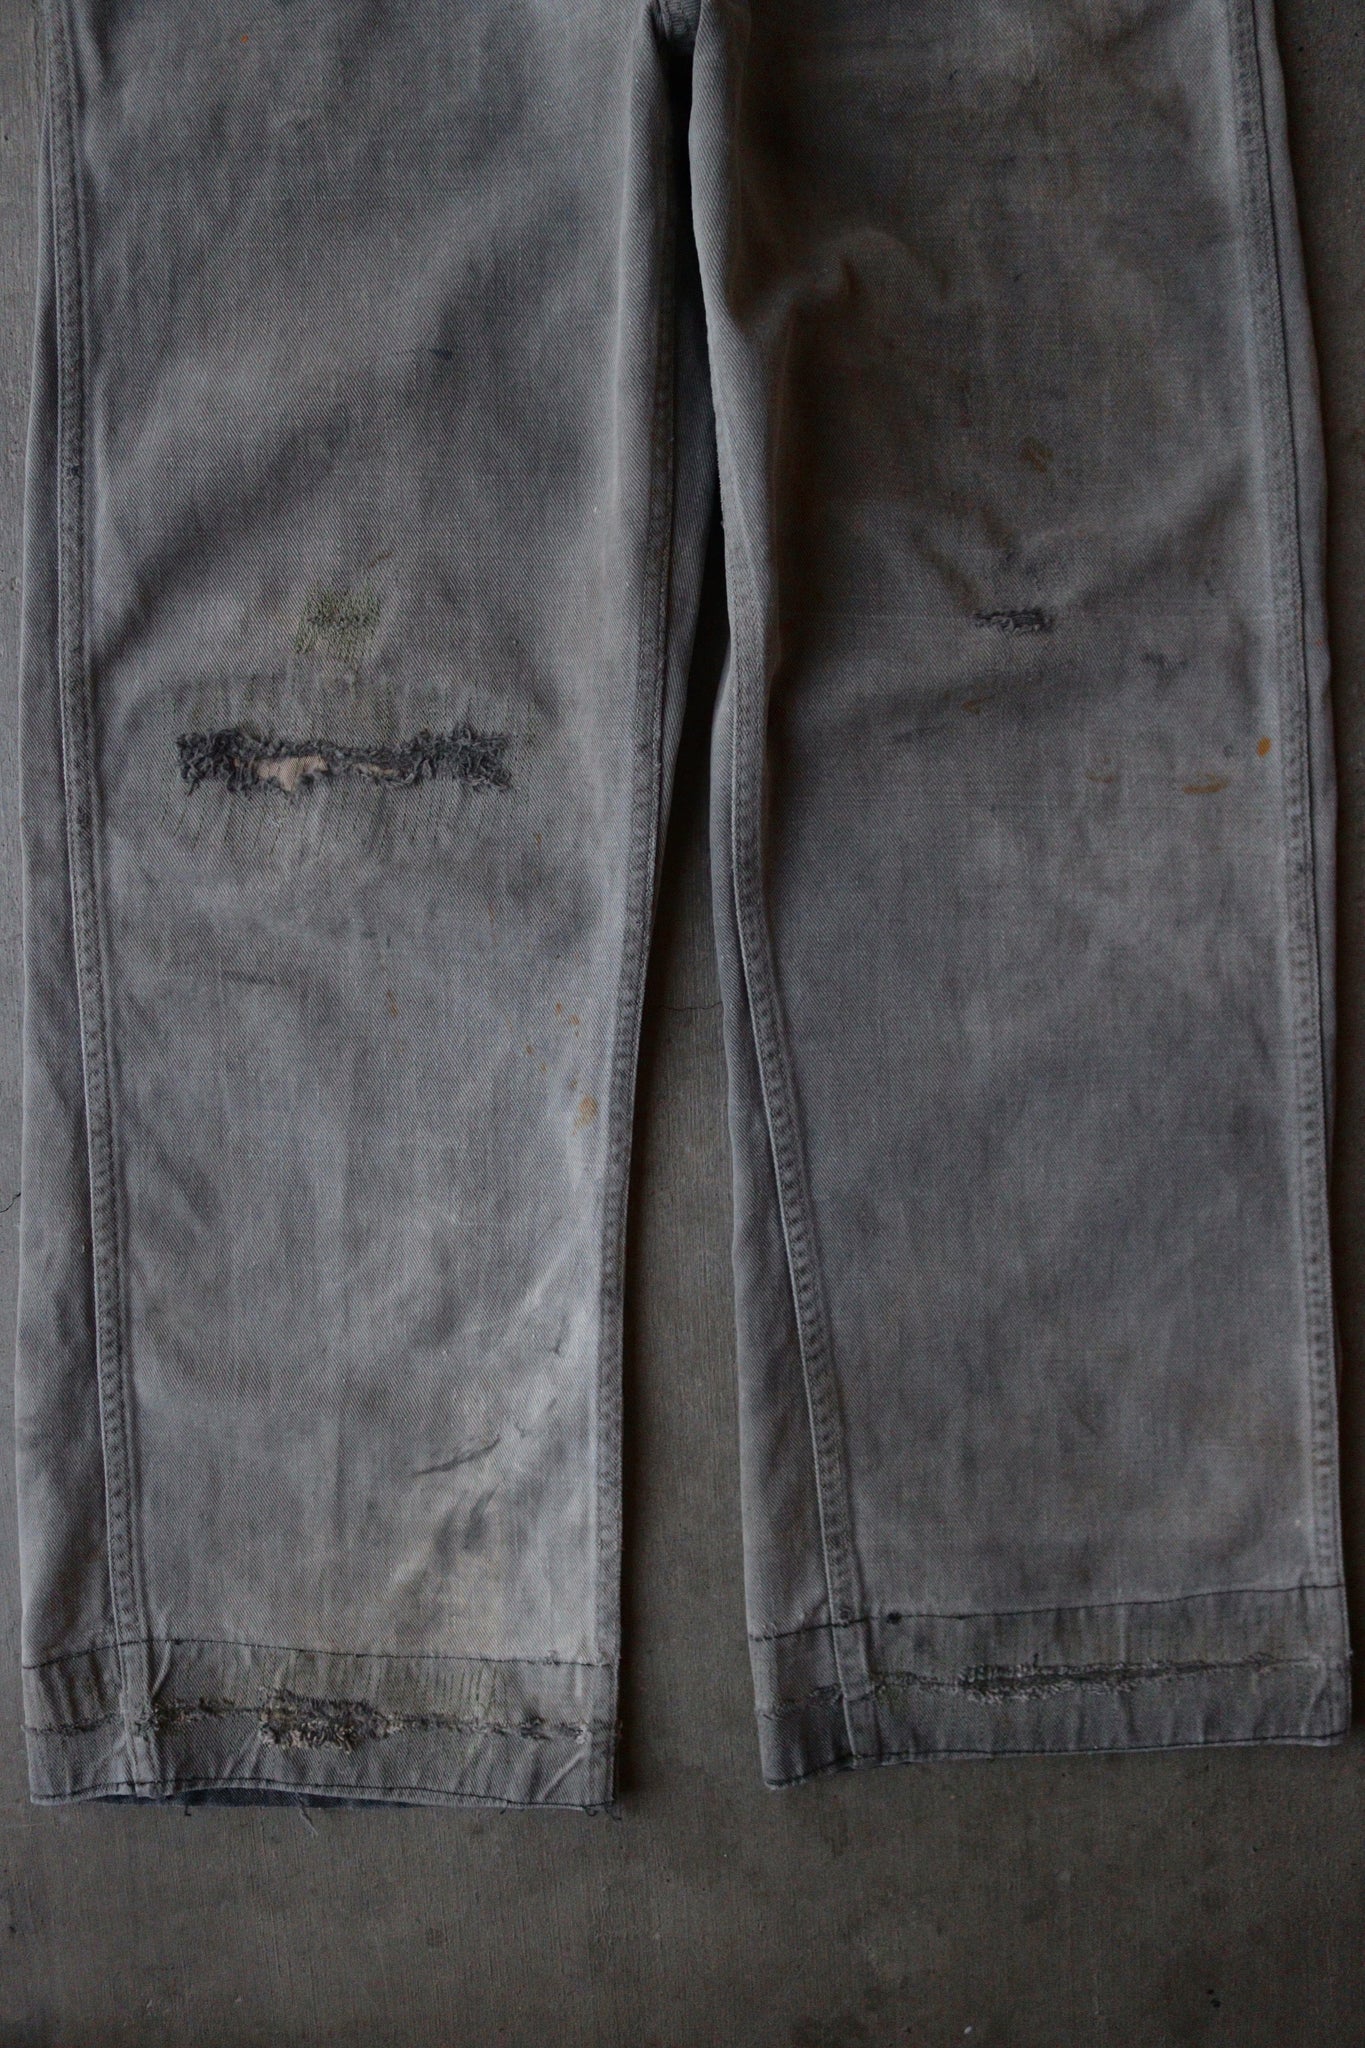 1940s Lee Can't Bust 'Em 'Friko Jeens' Faded & Repaired Work Pants - 32